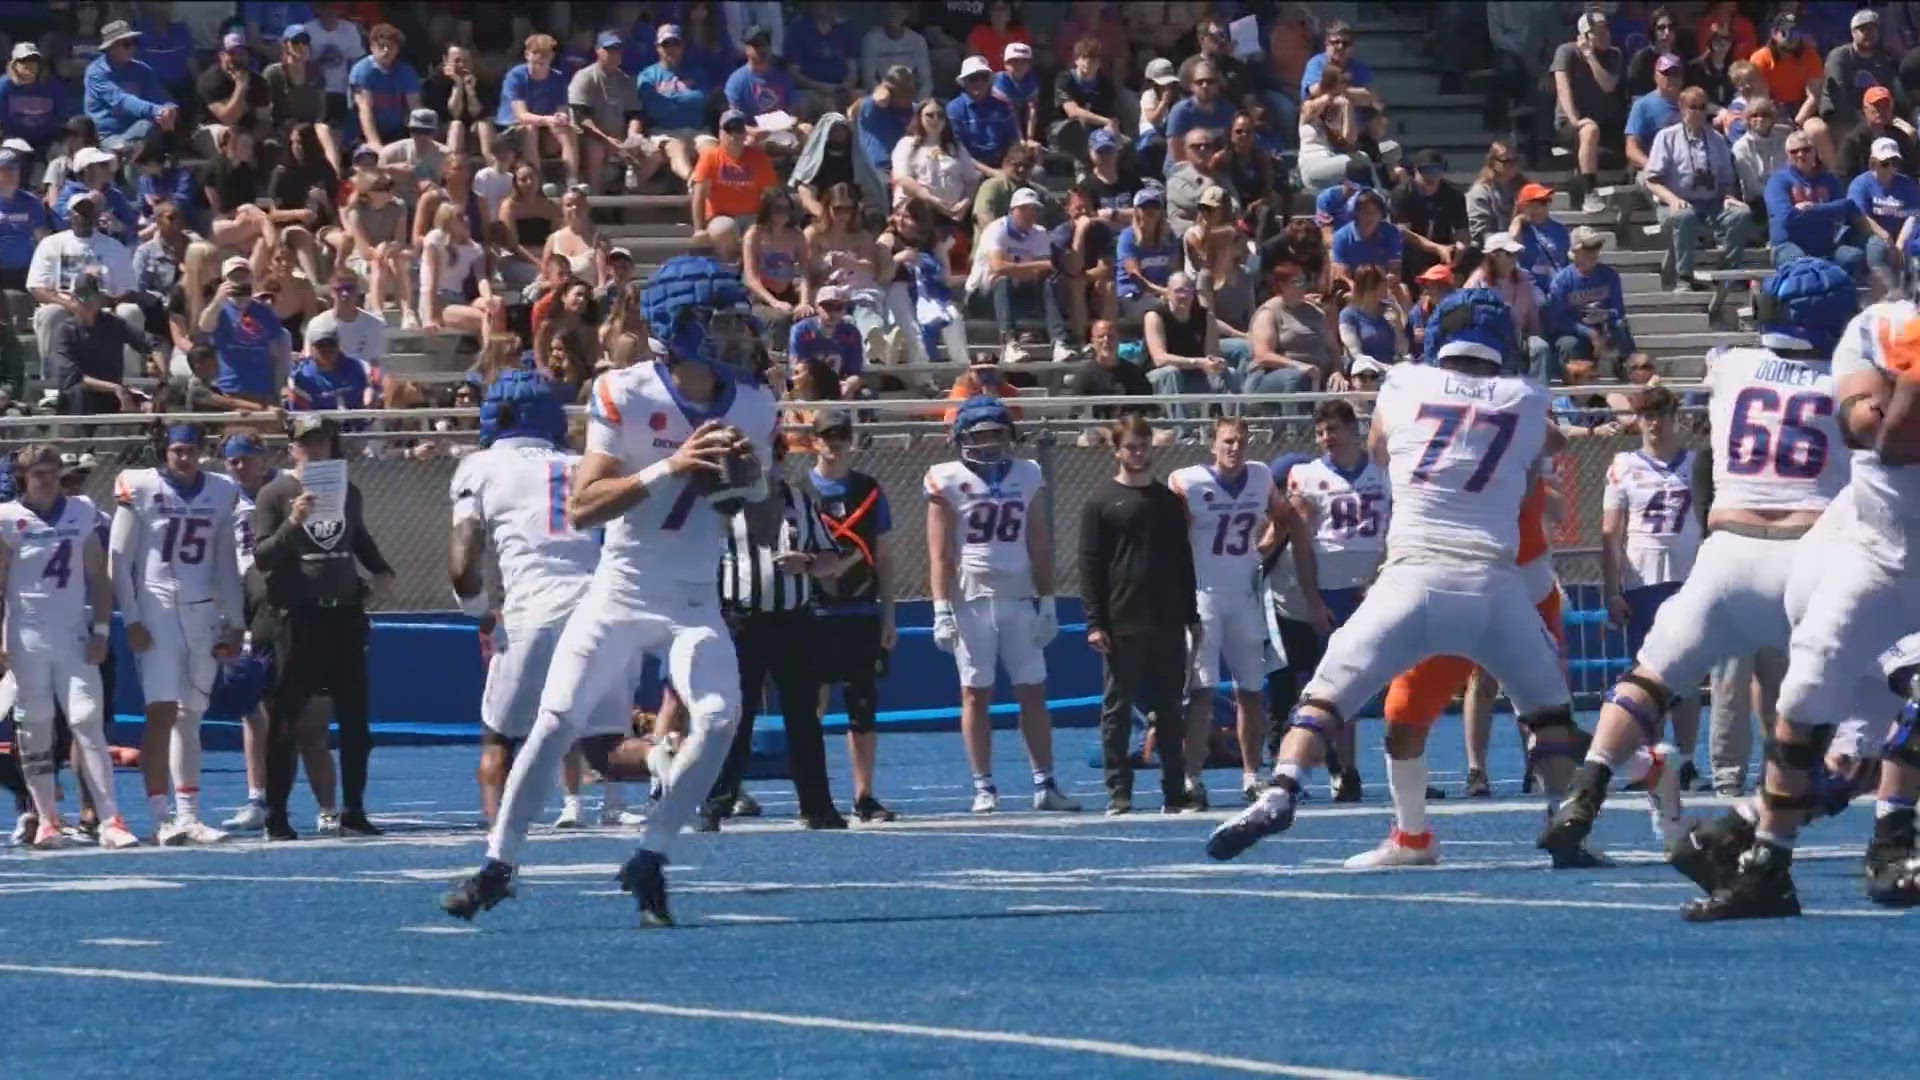 Nelson completed 9-of-16 passes for 137 yards and a touchdown on Saturday. Head coach Spencer Danielson discusses his development since arriving at Boise State.